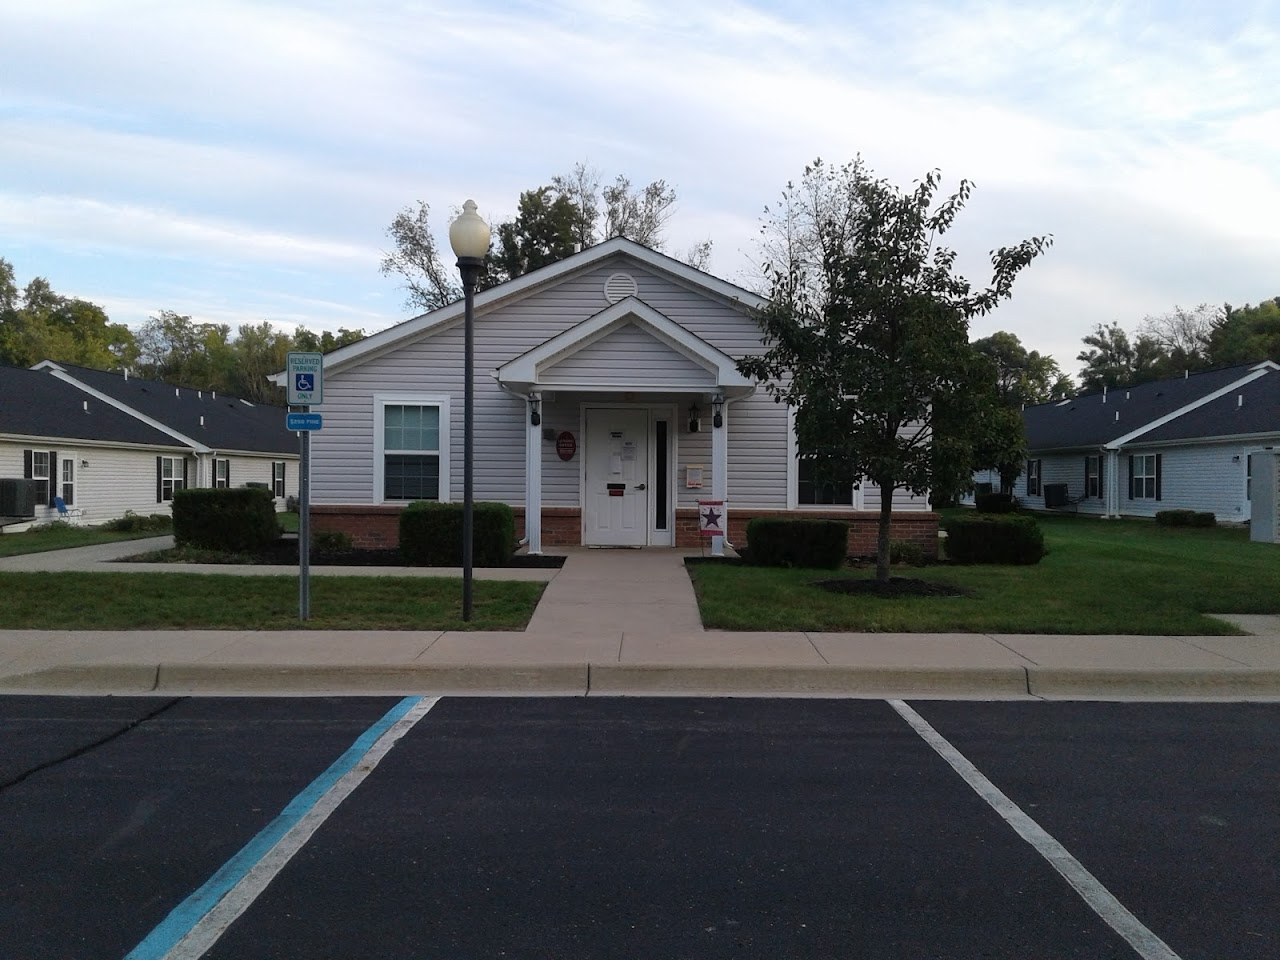 Photo of HAMPTON POINTE. Affordable housing located at 905 11TH ST THREE RIVERS, MI 49093